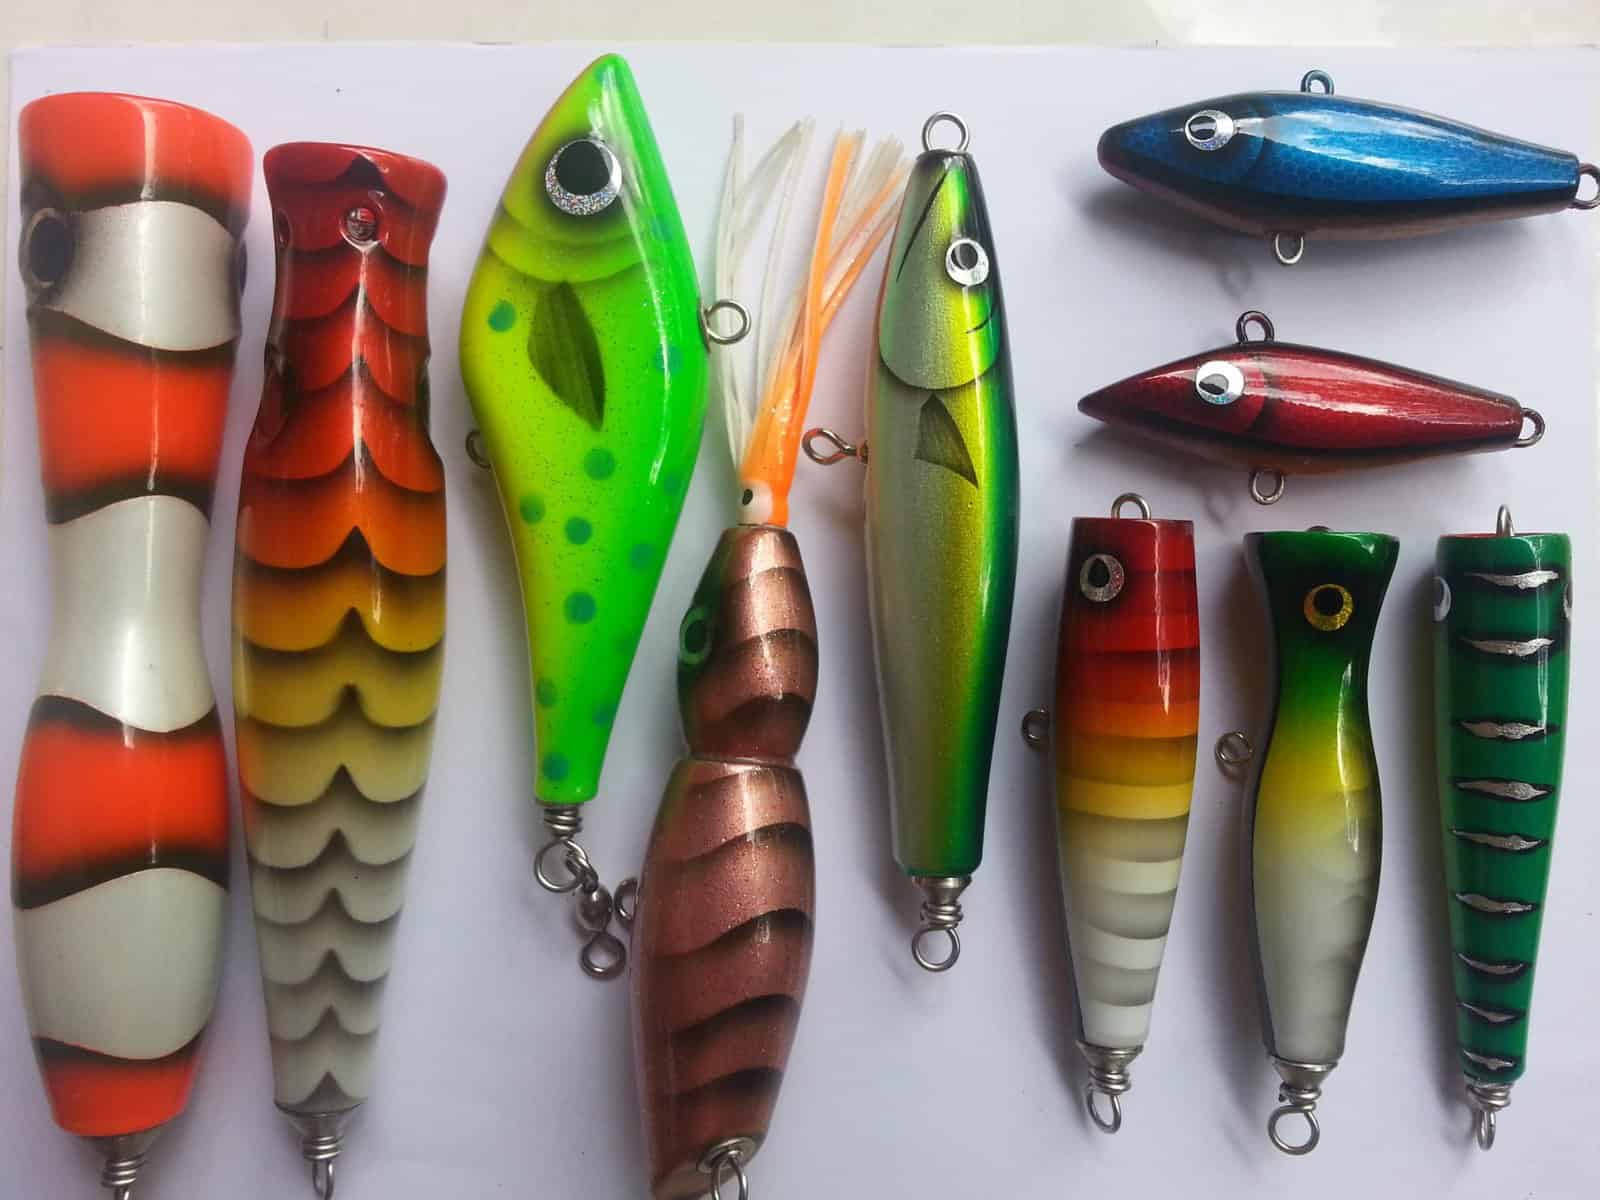 10 x For Real Assorted Shad Lures Soft Bait Fishing Shads Single Treble Hooks